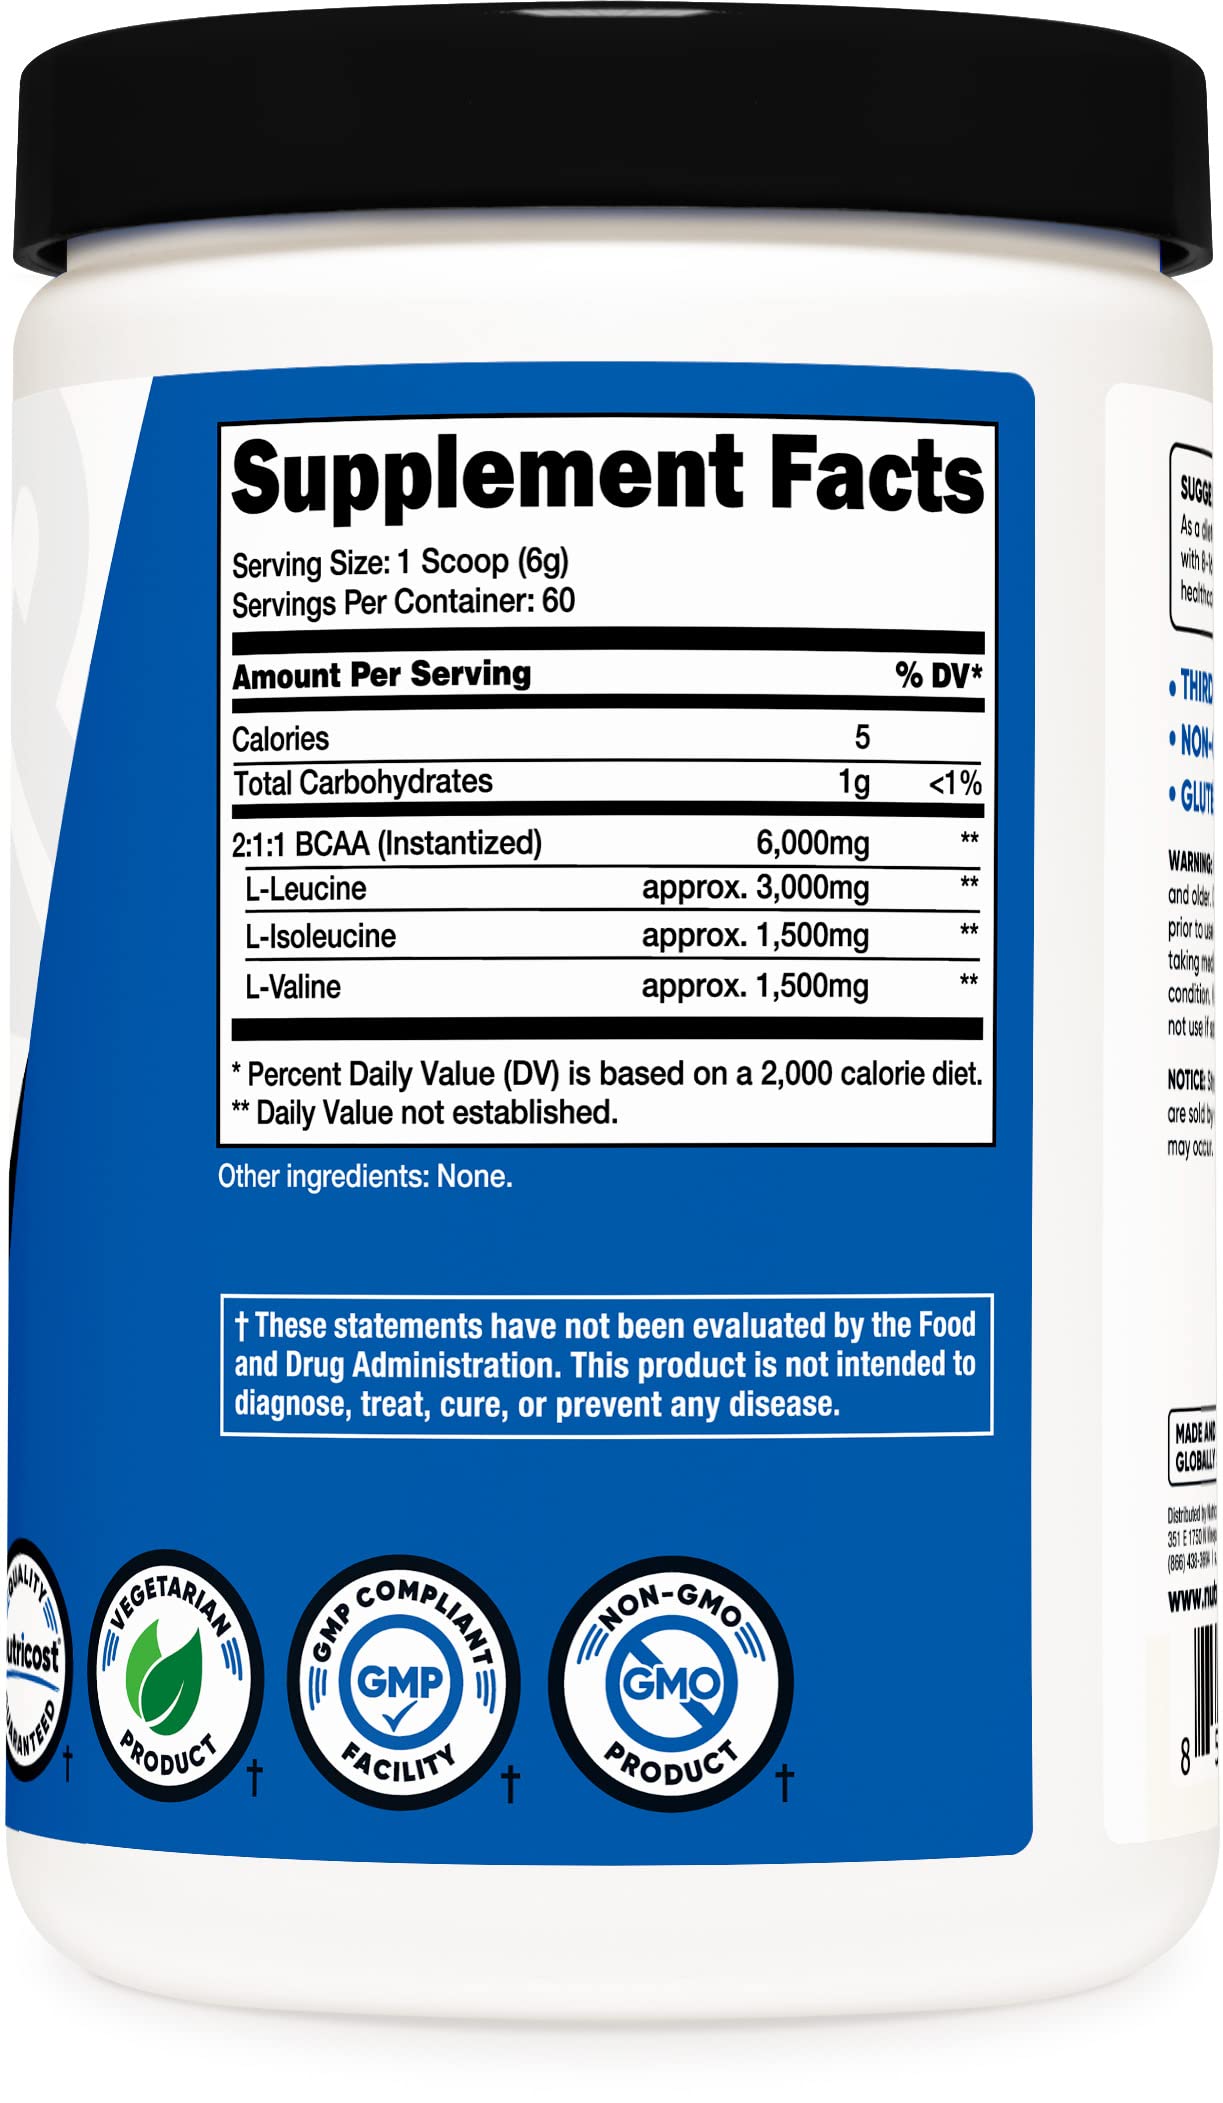 Nutricost BCAA Powder 2:1:1 (Unflavored, 60 Servings) - Vegetarian, Non-GMO, Gluten Free, Branched Chain Amino Acids